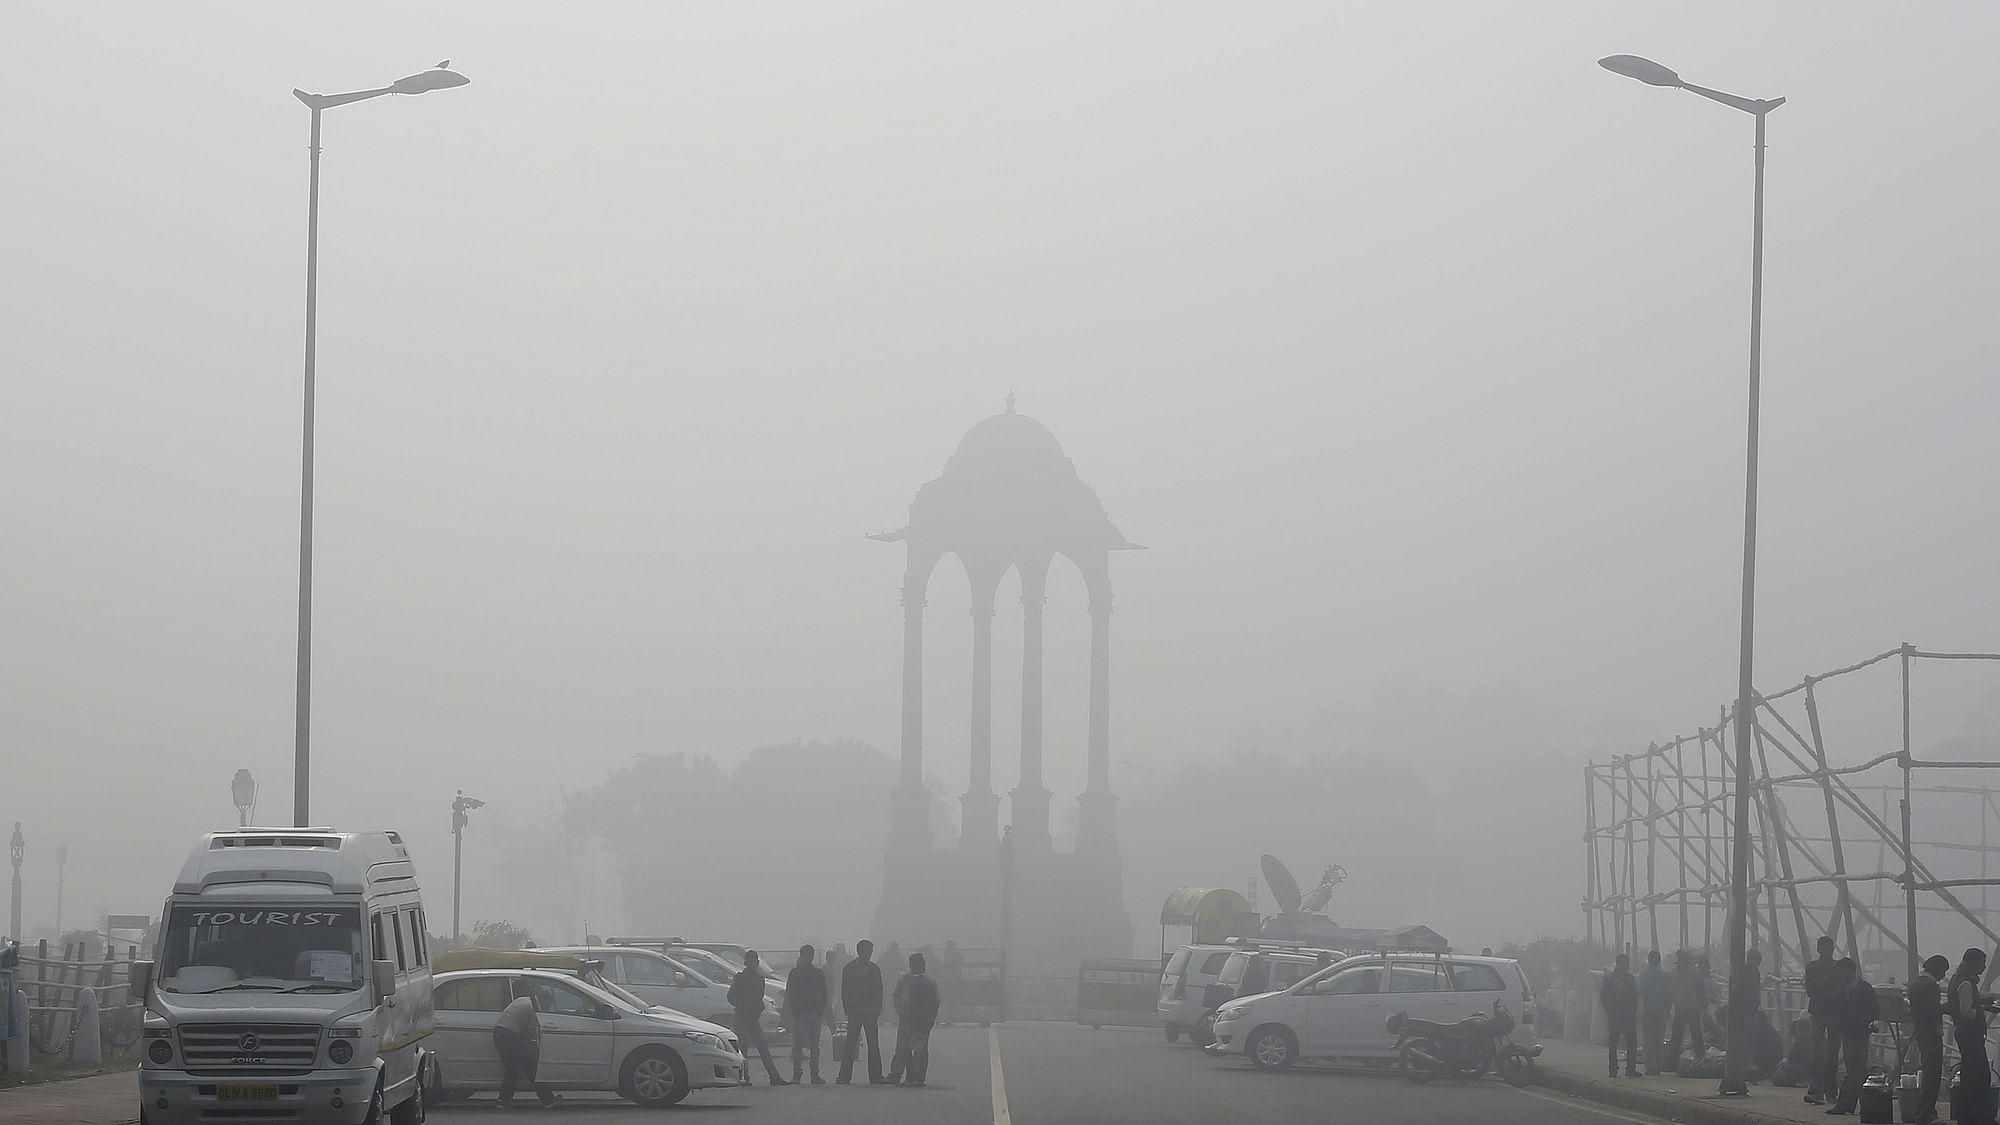 File photo of a smoggy day in Delhi. Image used for representational purpose. (Photo: Reuters)